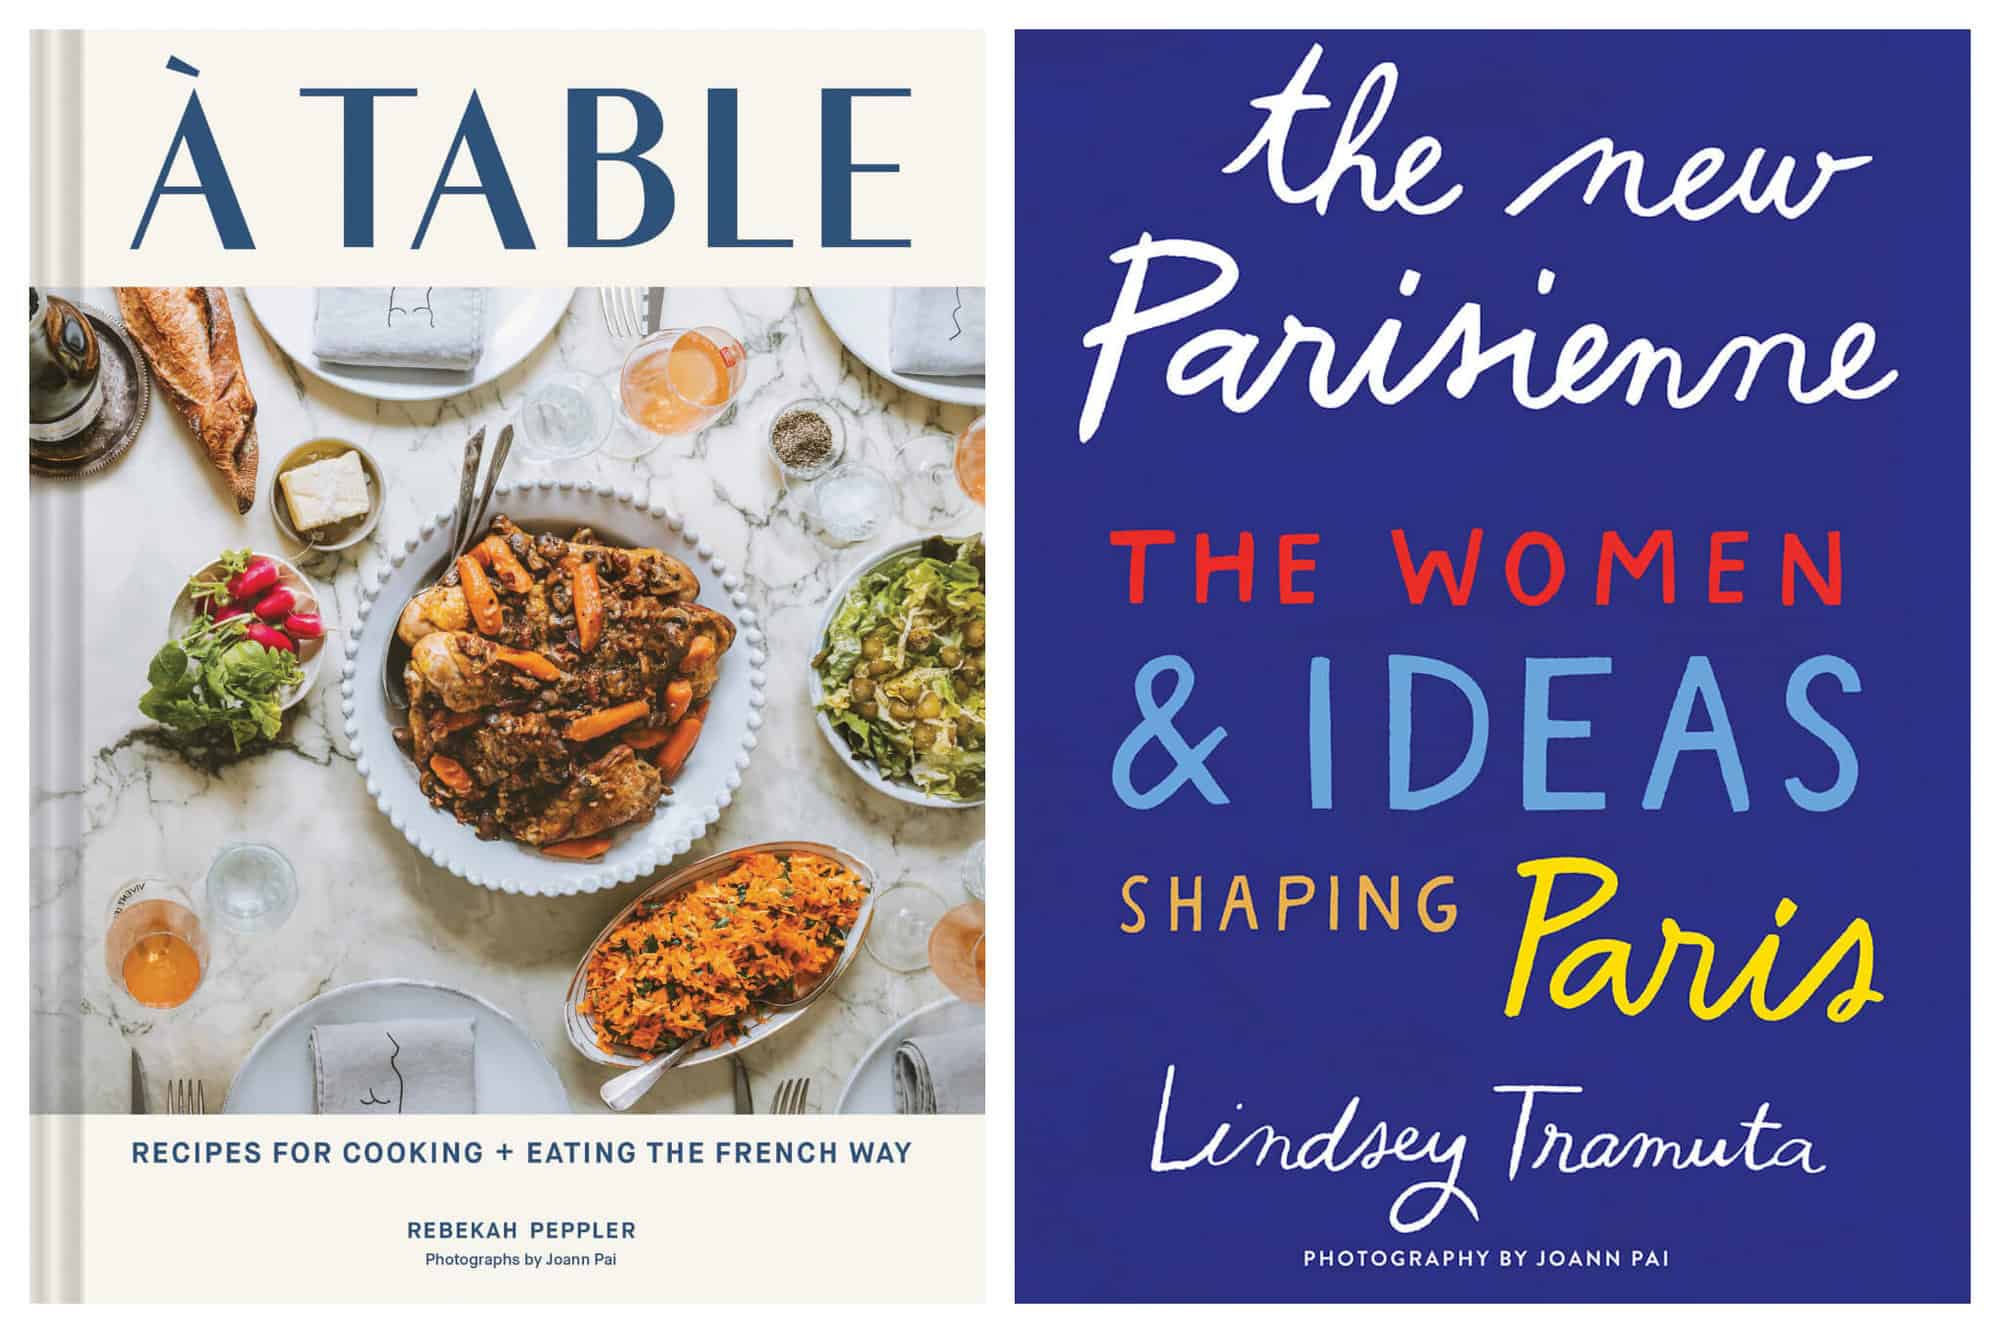 Left: the front cover of Rebekah Peppler's book "A Table". Right: the front cover of Lindsey Tramuta's book "The New Parisienne".